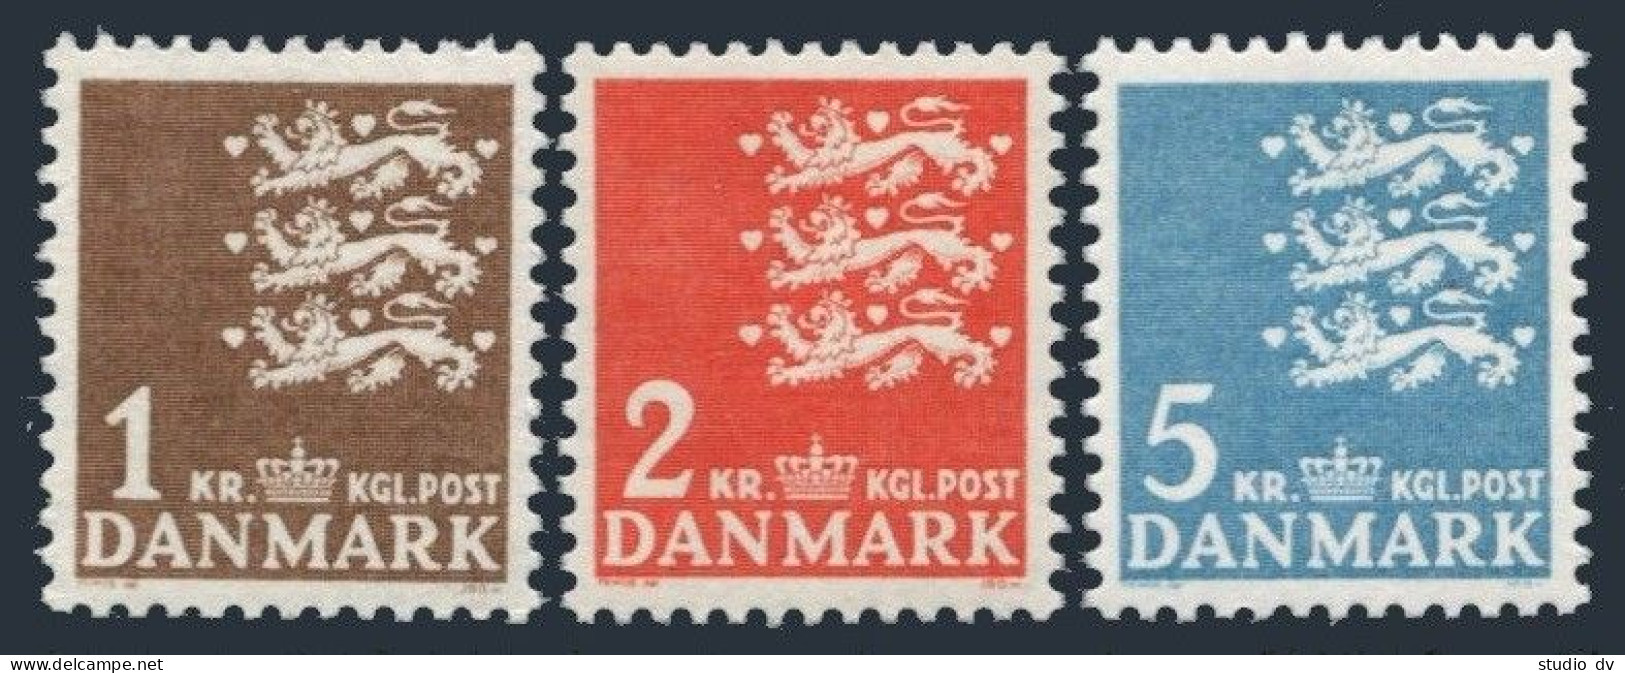 Denmark 297-299,MNH.Michel 289-291. Small State Seal.1946-1947. - Neufs